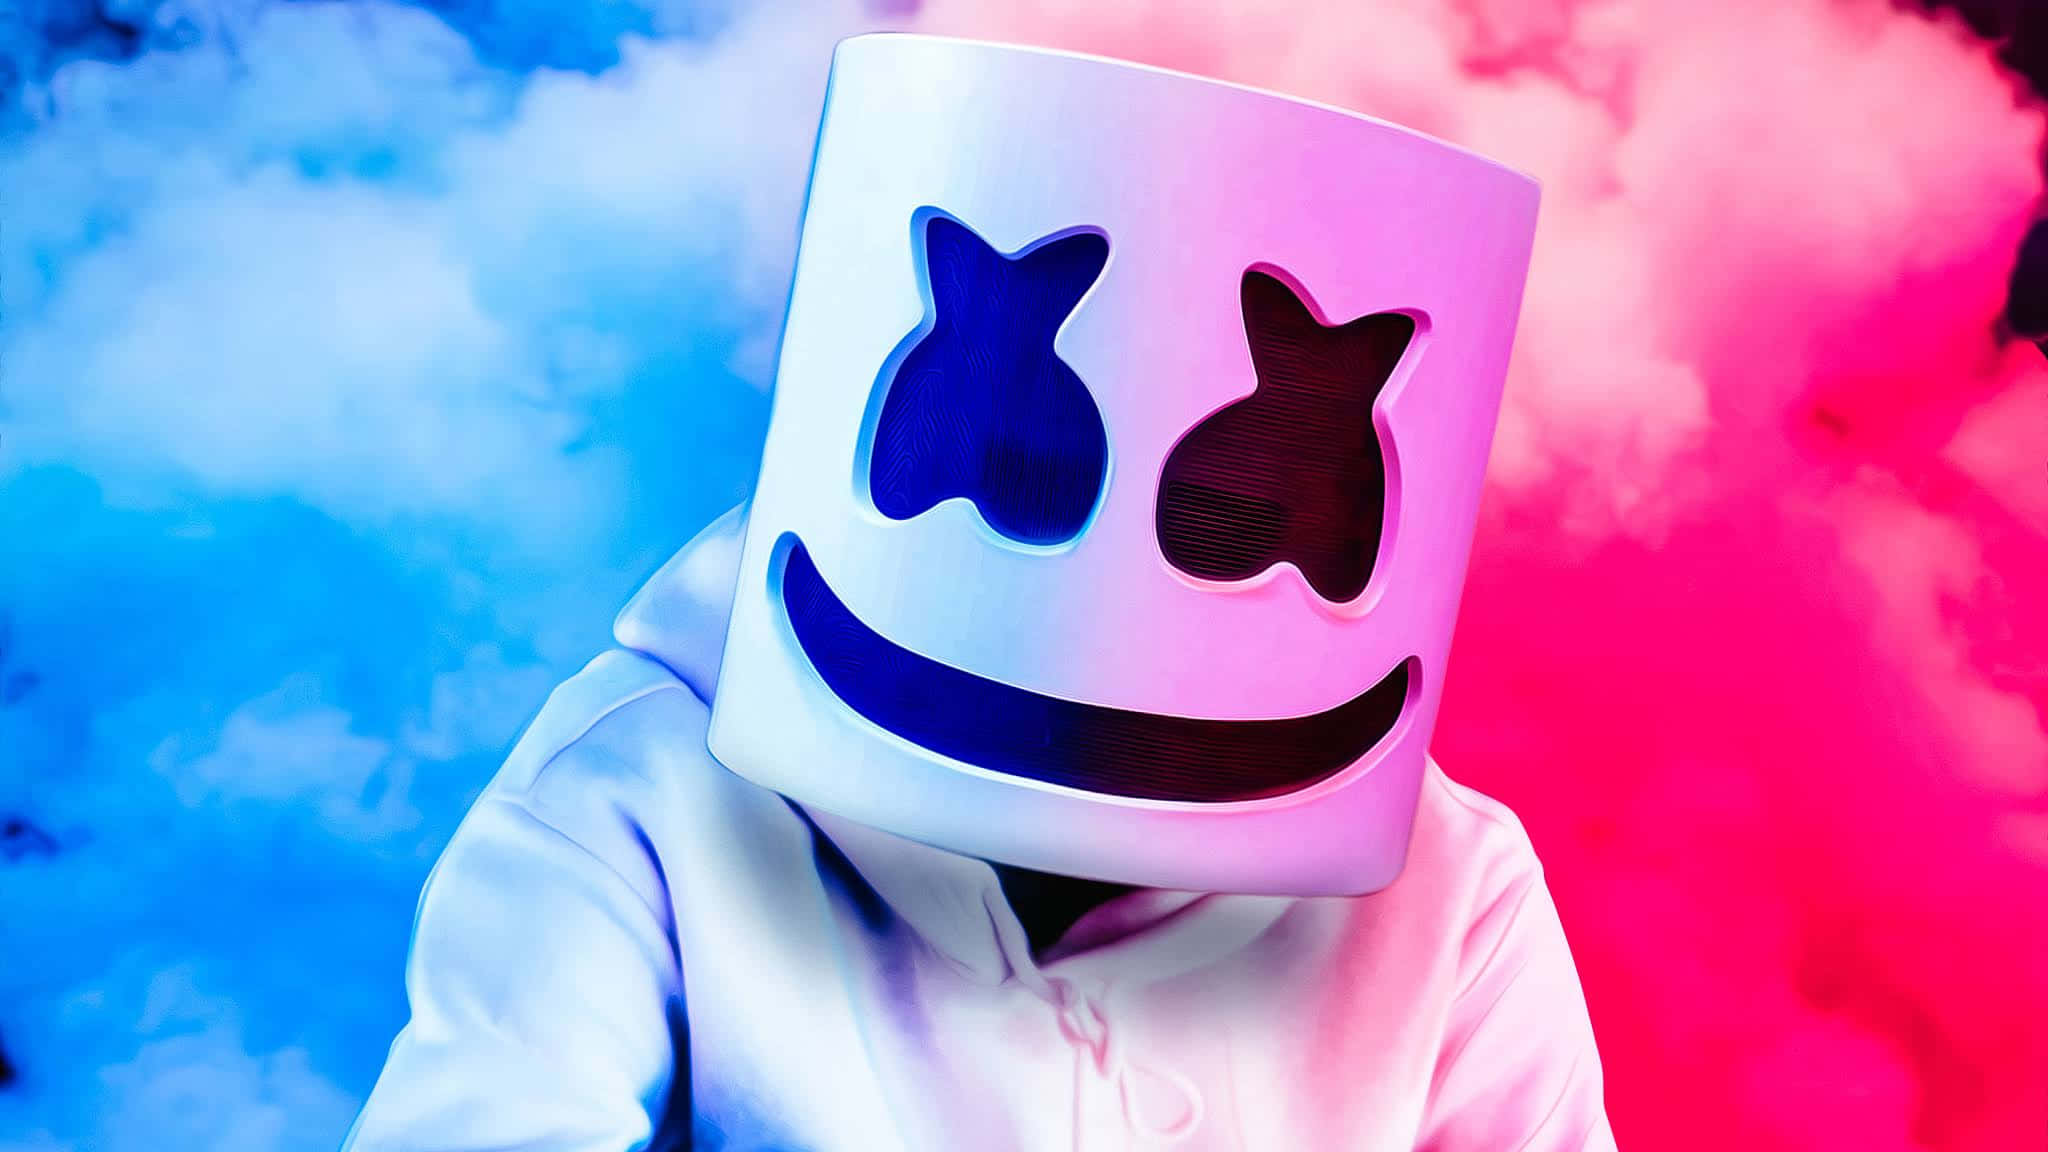 Express Yourself in Music with Marshmello"